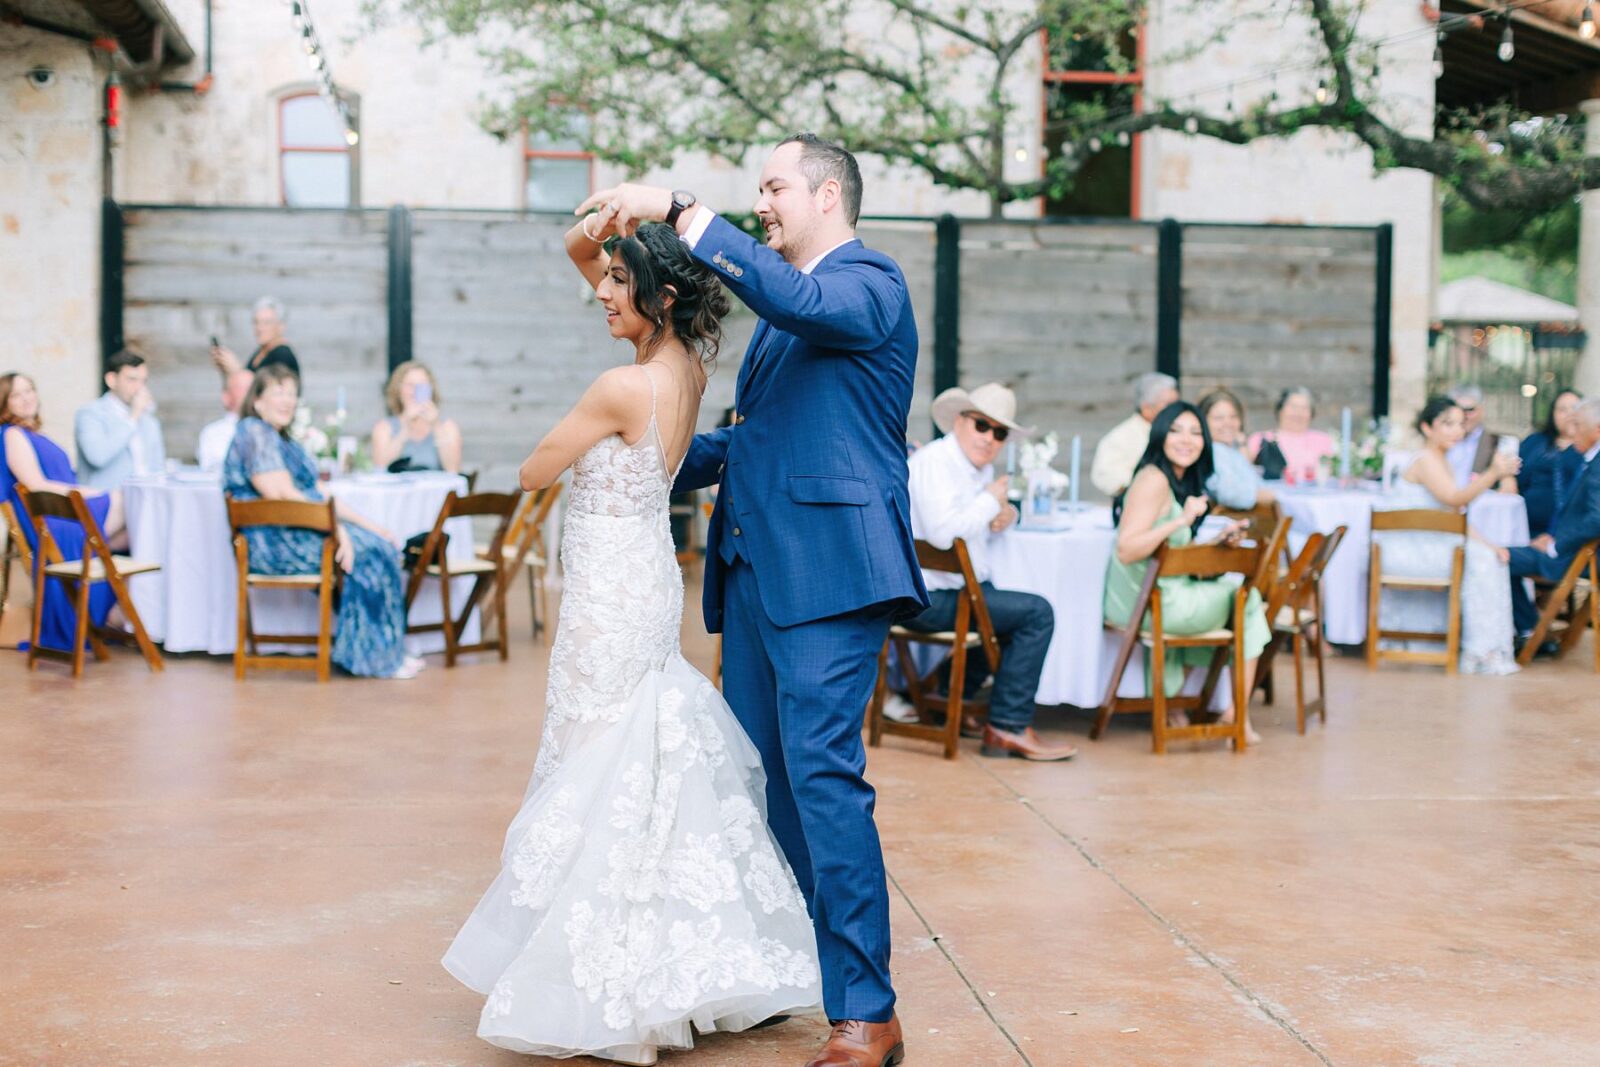 bride and groom first dance at reception, garey house reception decorations, cana events, florals by cana events, garey house wedding, reception at garey house, catholic wedding photography tips, photos by Tara Lyons Photography, Austin texas wedding photographer, garey house wedding